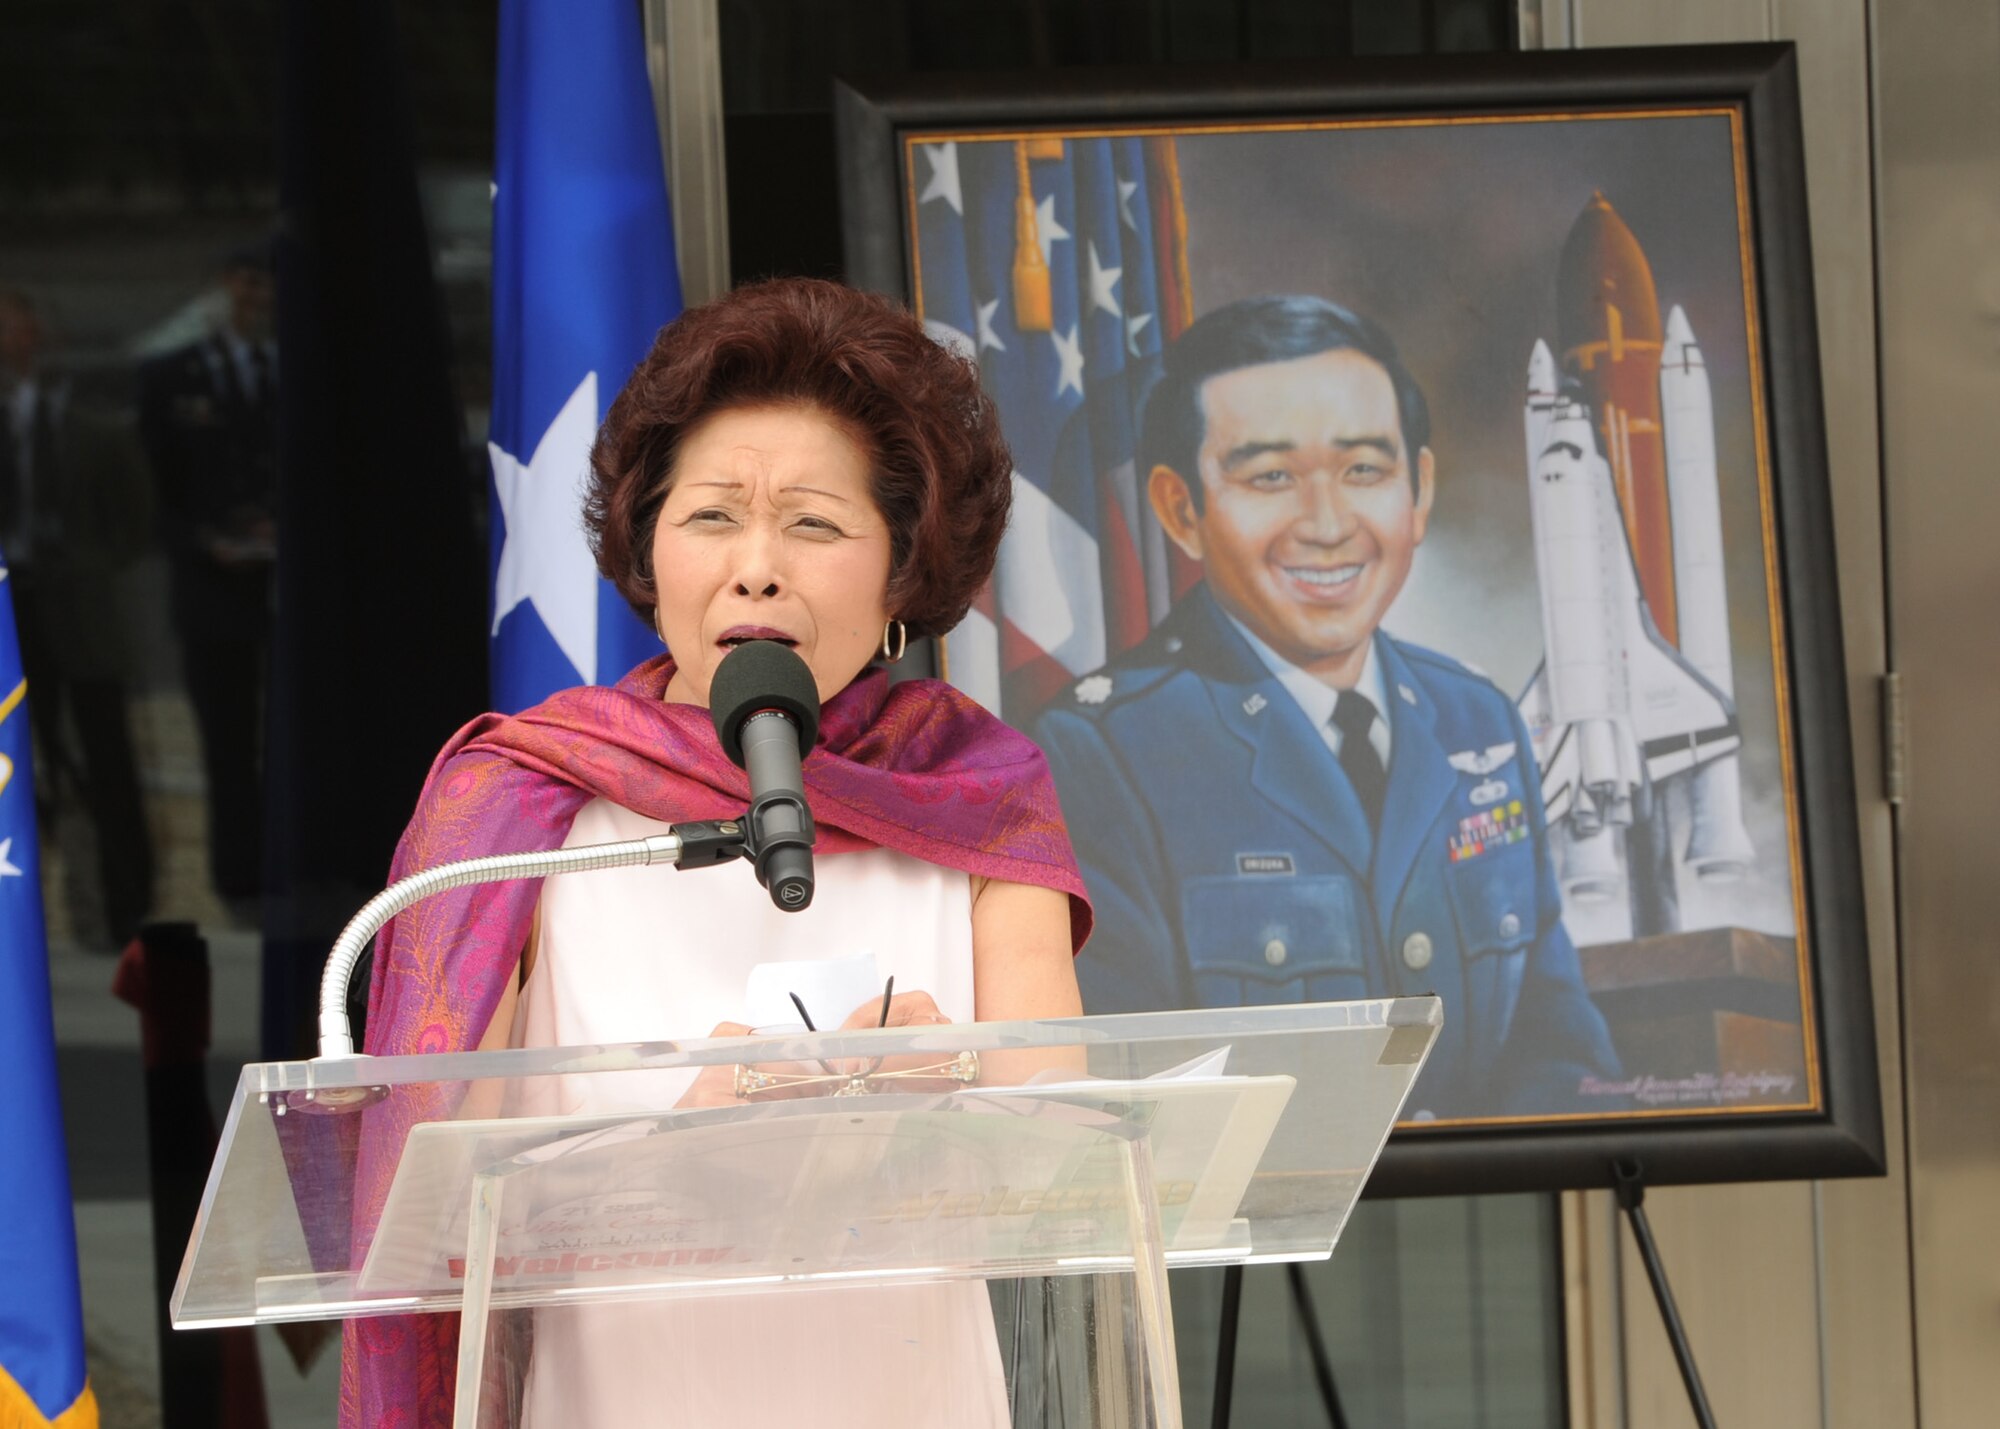 VANDENBERG AFB, Calif.-- Lorna Onizuka, widow of Col. Ellison Onizuka, an astronaut who died aboard Space Shuttle Challenger Jan. 28, 1986, delivers a speech during the Ellison Onizuka Satellite Operations facility dedication ceremony here July 30, 2010. Onizuka Air Force Station, previously located in Sunnyvale, officially closed July 28. The 21st Space Operations Squadron transferred here as part of an effort to consolidate satellite command and control operations while reducing excess infrastructure. Onizuka AFS was selected for closure by the Base Closure and Realignment Commission in 2005 (U.S. Air Force Photo/Senior Airman Bryan Boyette)